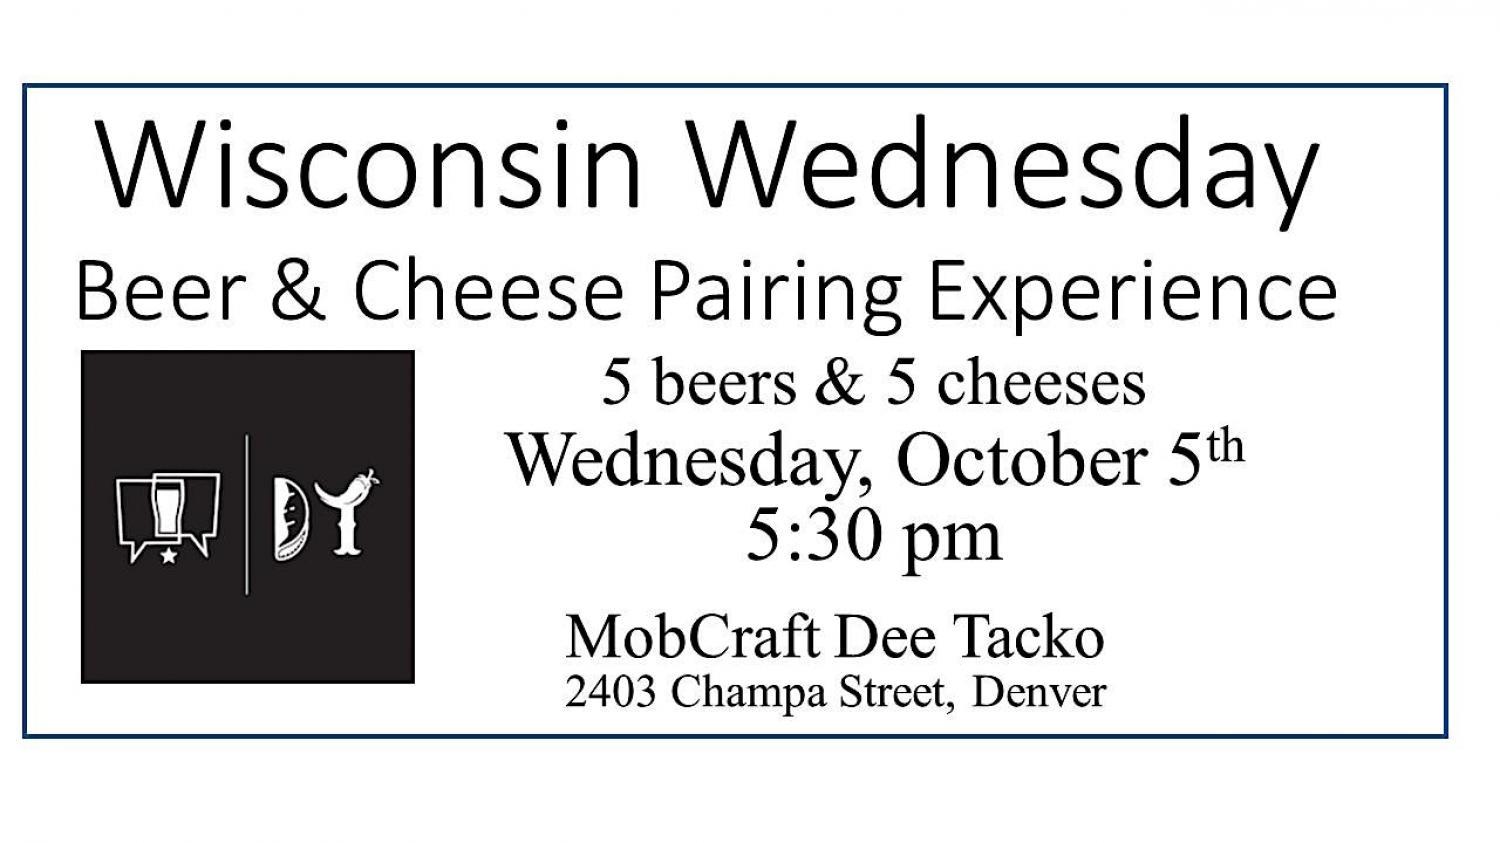 Wisconsin Wednesday - Beer & Cheese Pairing Experience
Wed Oct 5, 5:30 PM - Wed Oct 5, 6:30 PM